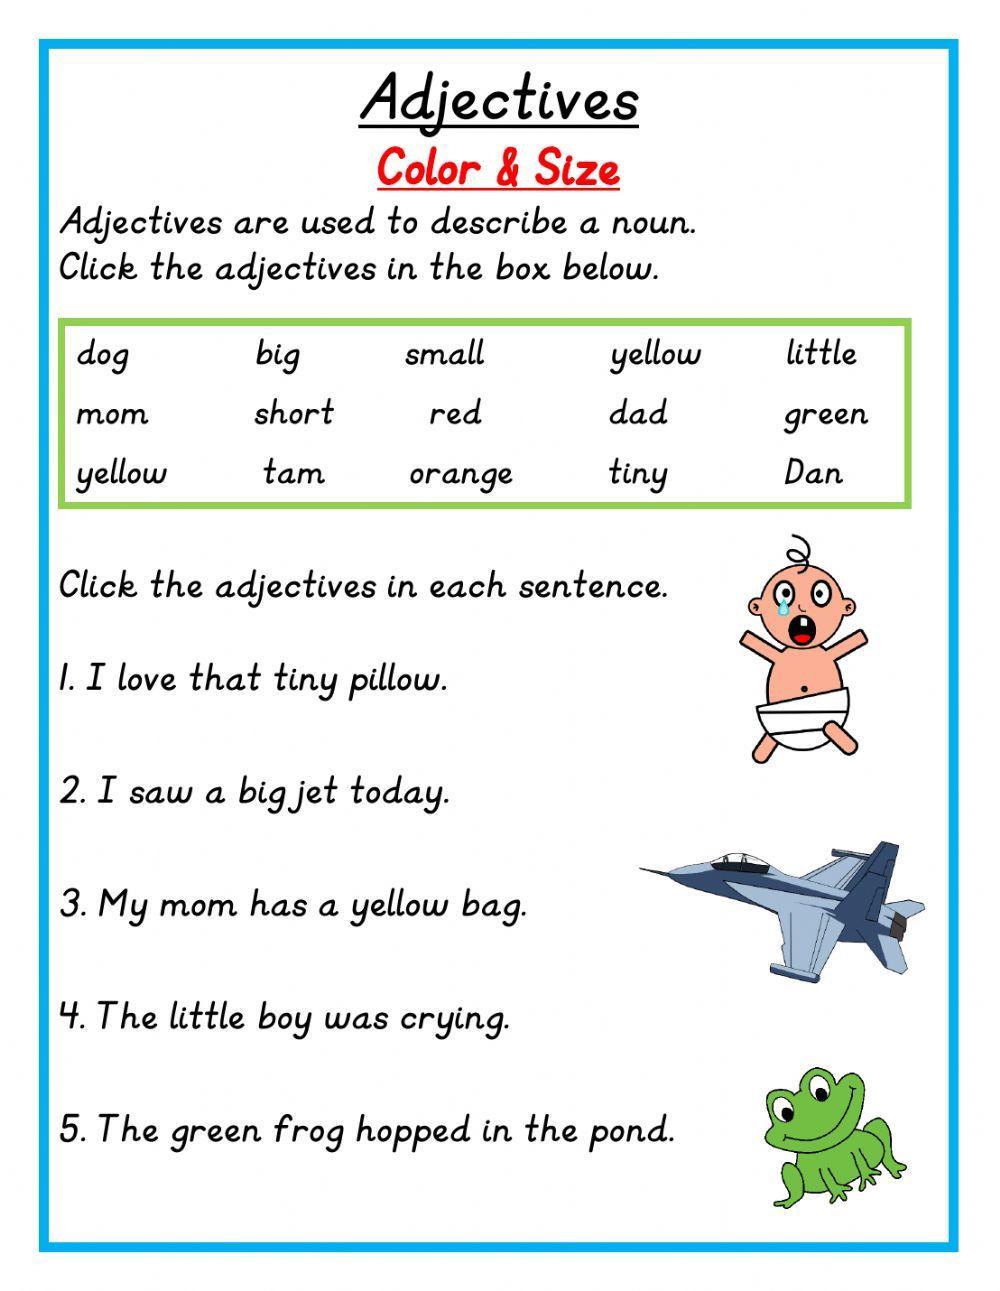 Live Worksheet On Adjectives For Class 4